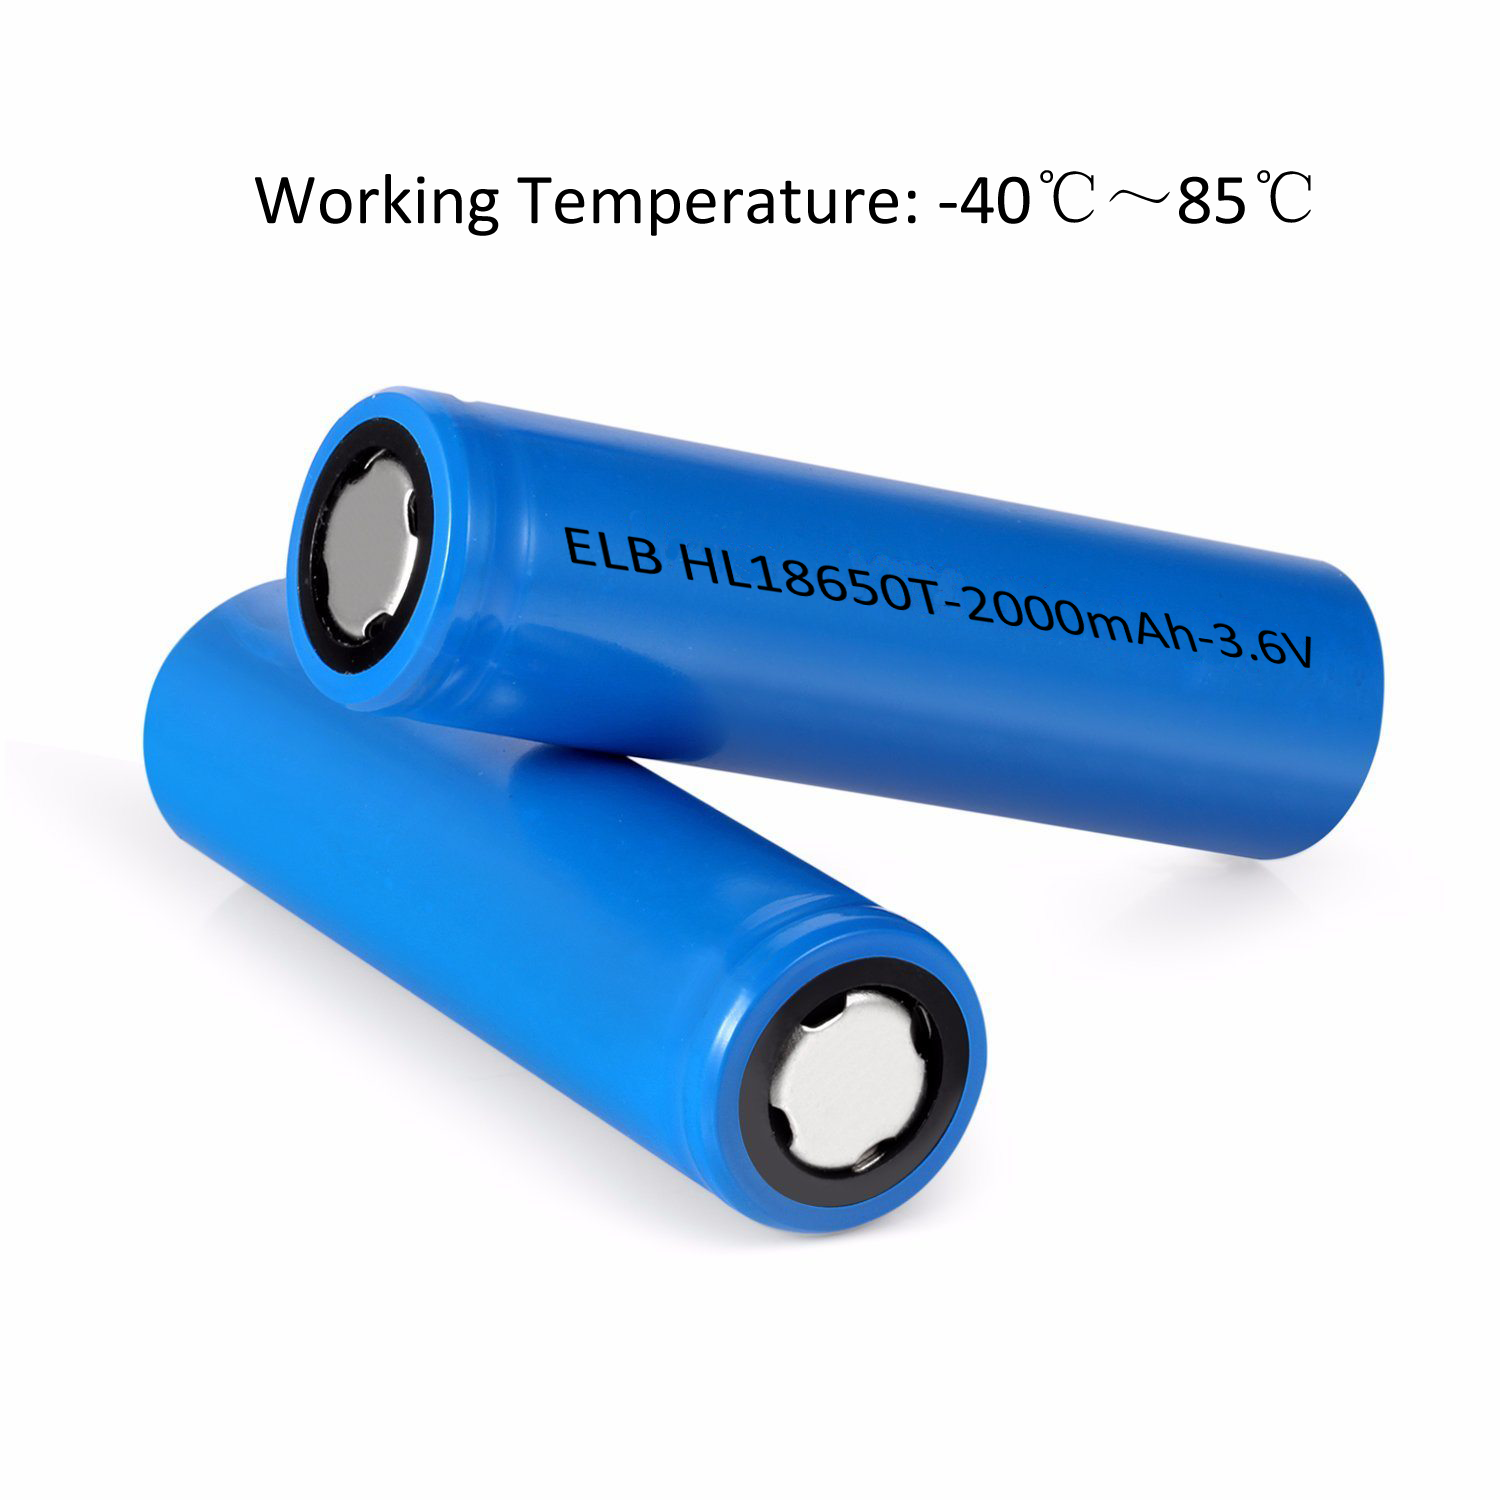 https://www.ecolithiumbattery.com/wp-content/uploads/2022/05/18650-2000mAh-low-temperature-lithium-batteries.png